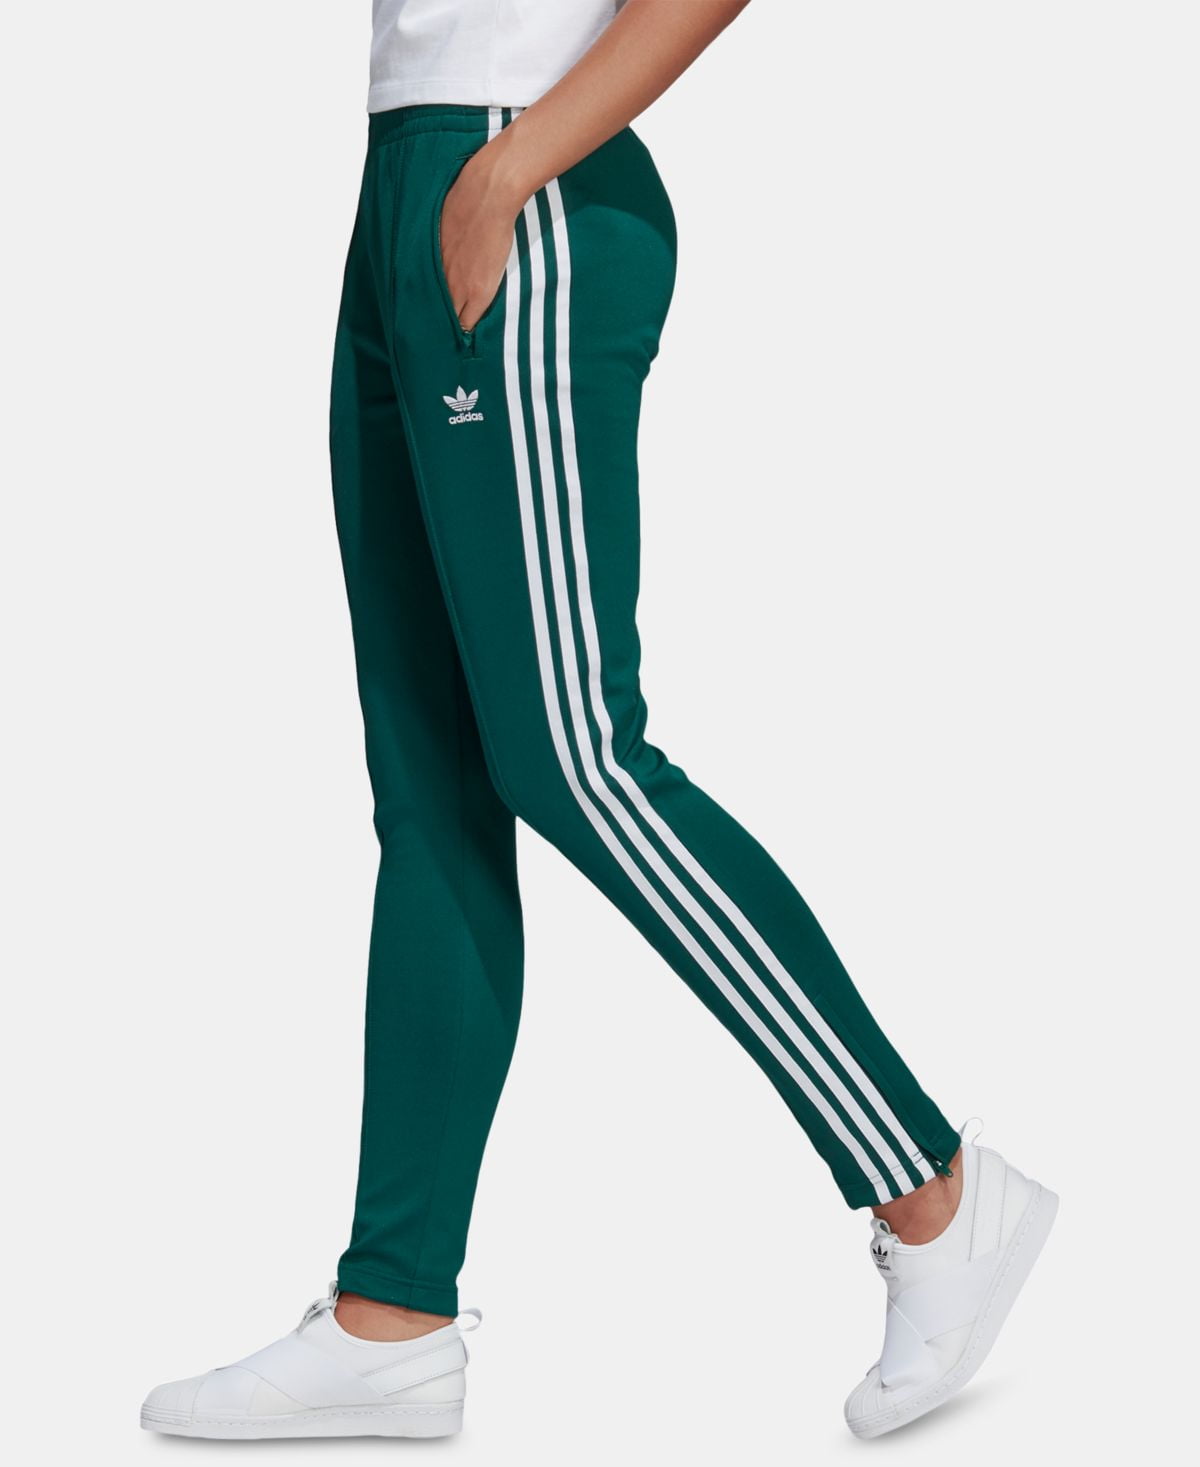 adidas joggers women's green color buy on PRM